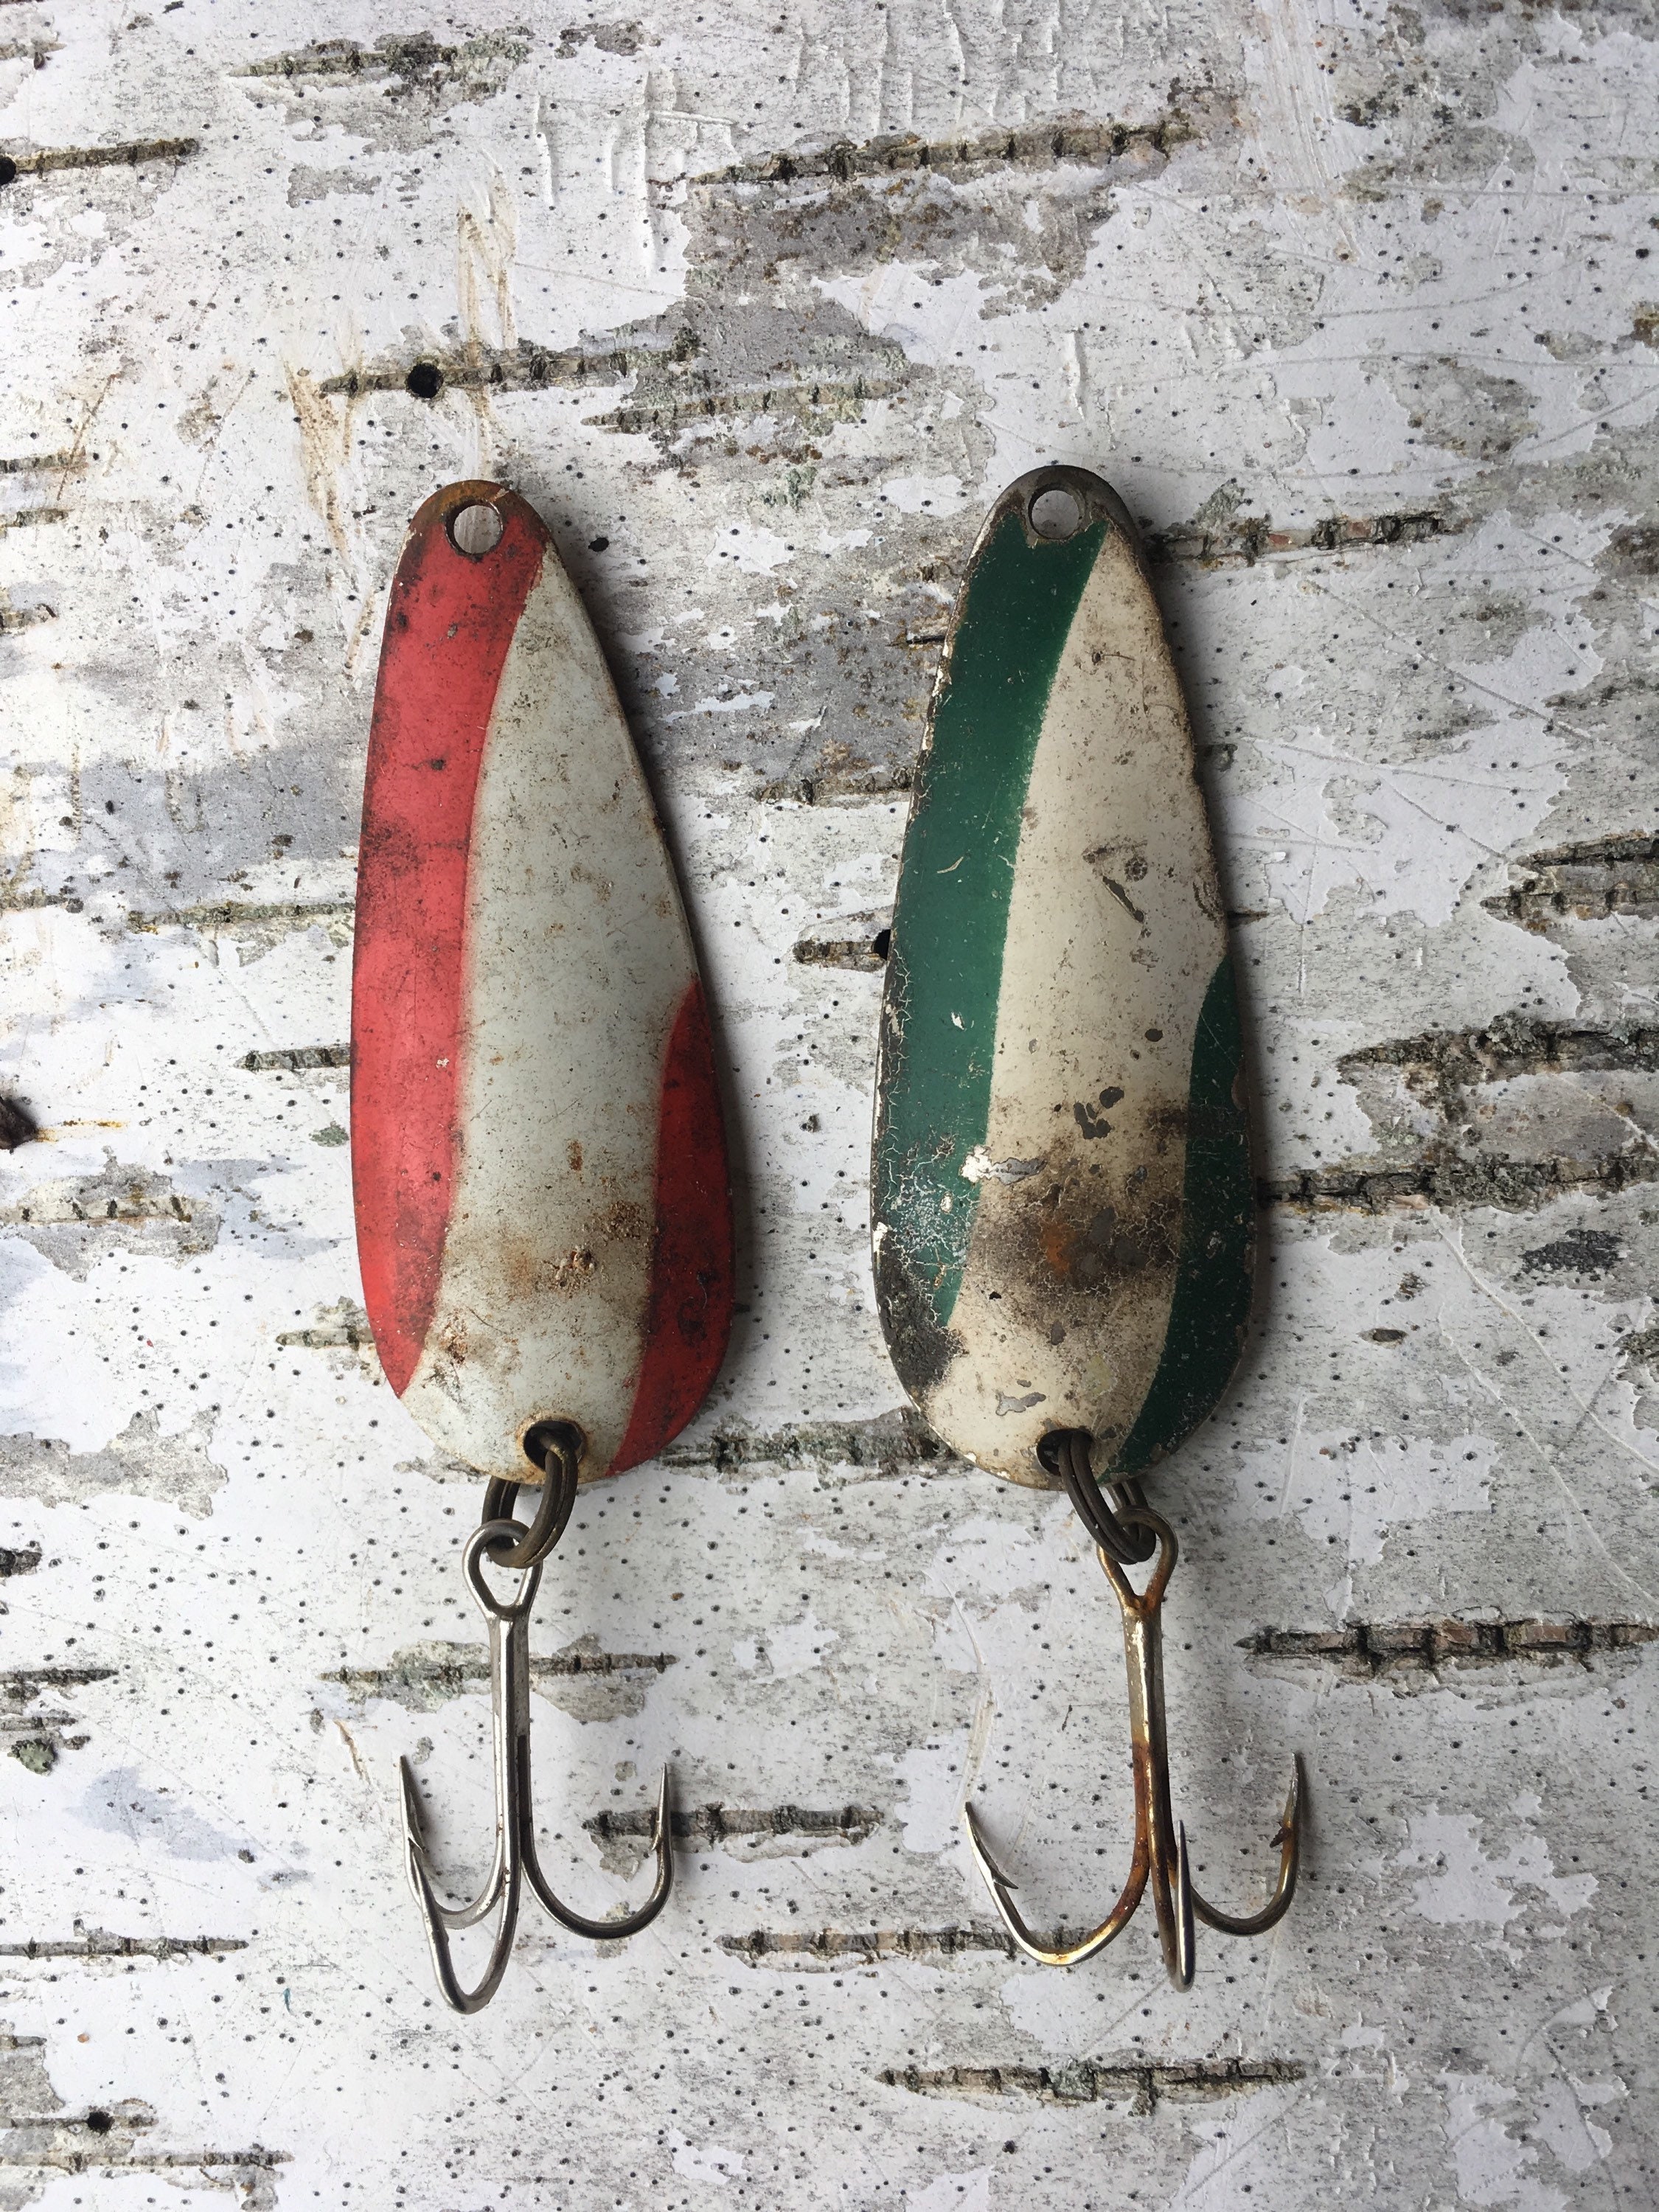 Daredevil Lure Fishing Set Spoon Lot Nebco Fish Old Antique Vintage Cabin  Metal Red White Green Flash Bait Aqua Small Pike LOT F -  Denmark